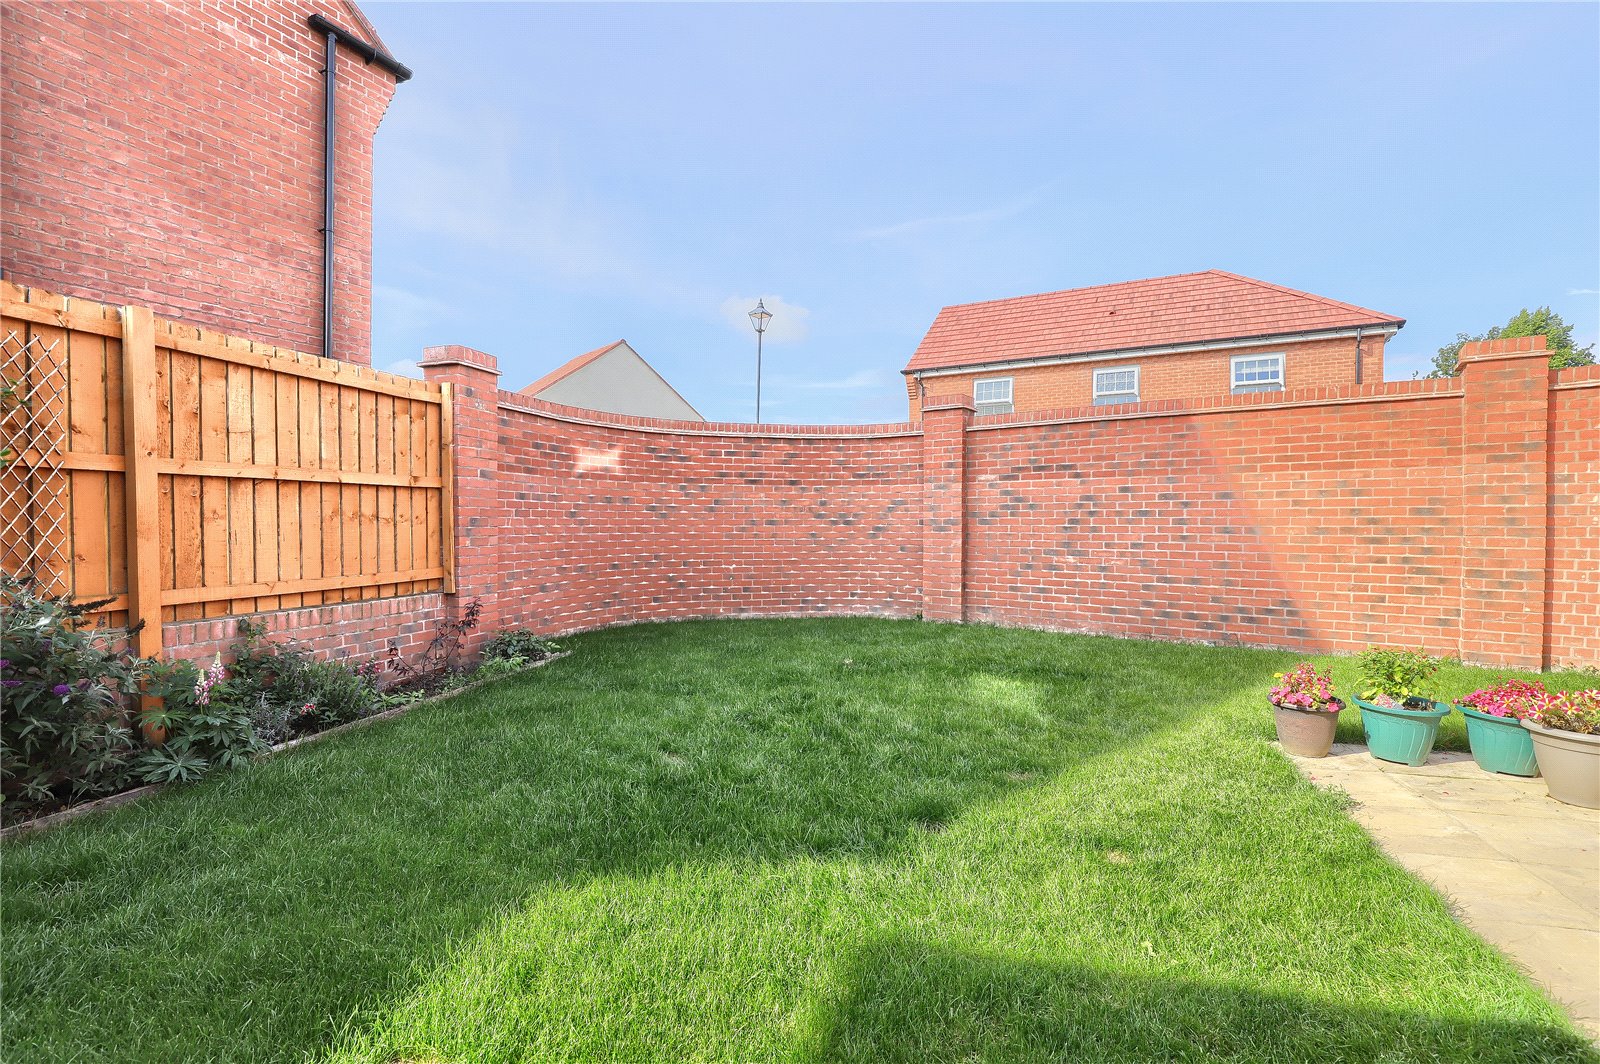 3 bed house for sale in Ayton Meadows, Nunthorpe 2